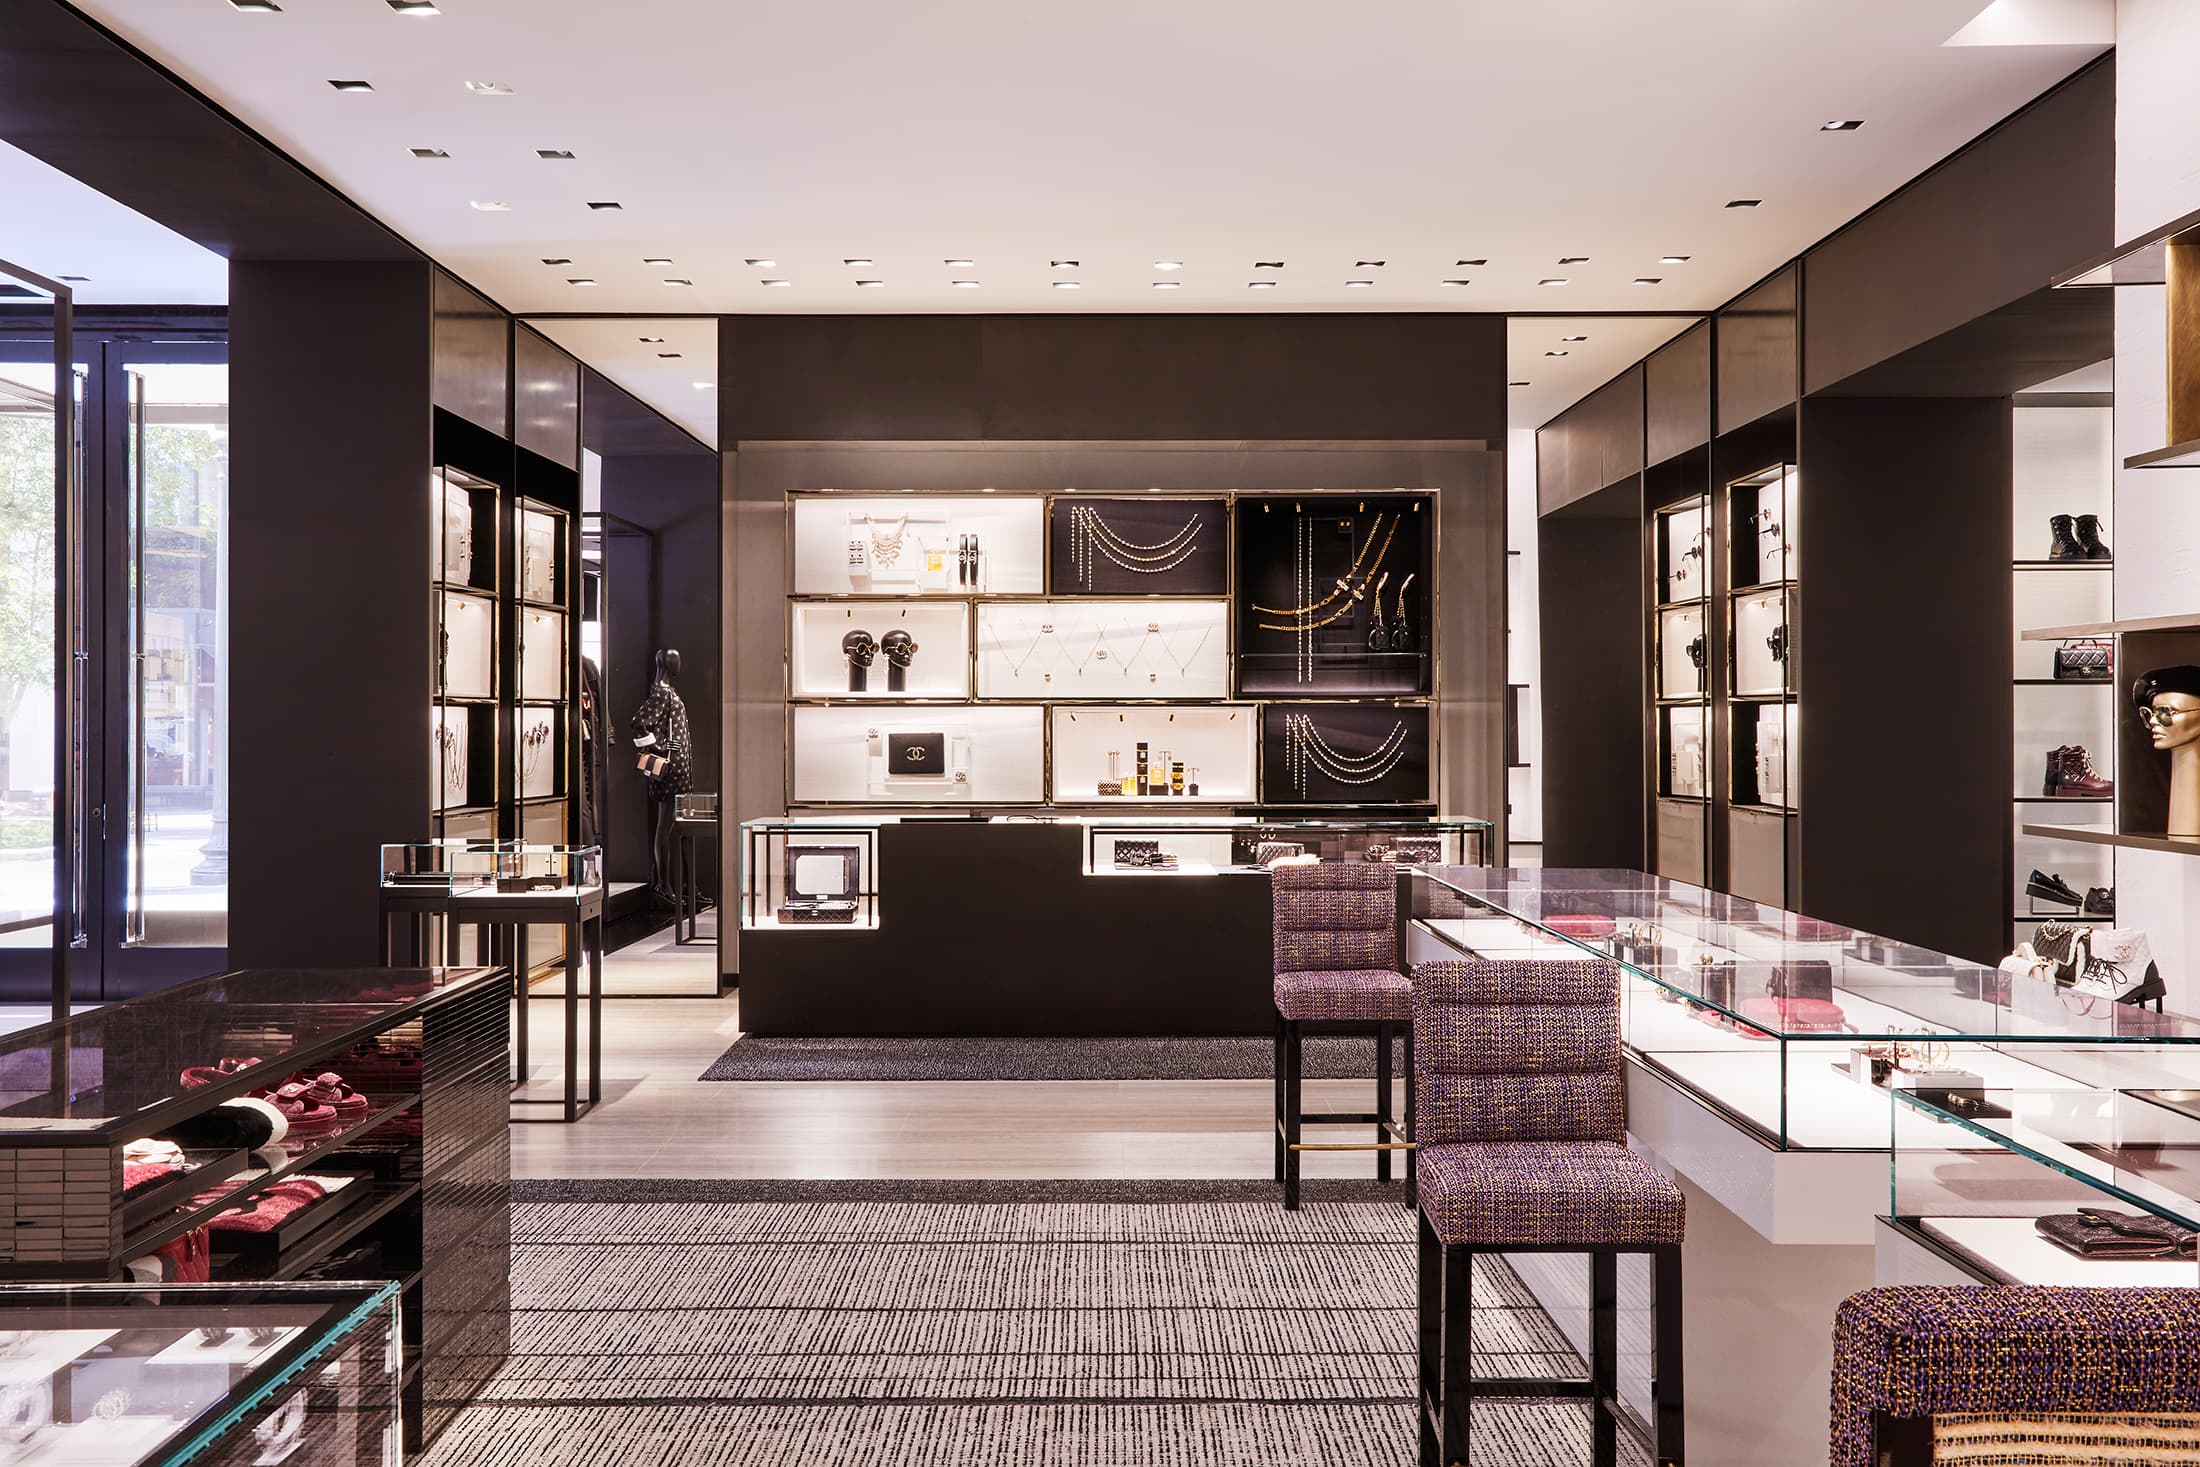 Chanel Opens New Boutique In Washington, D.C.